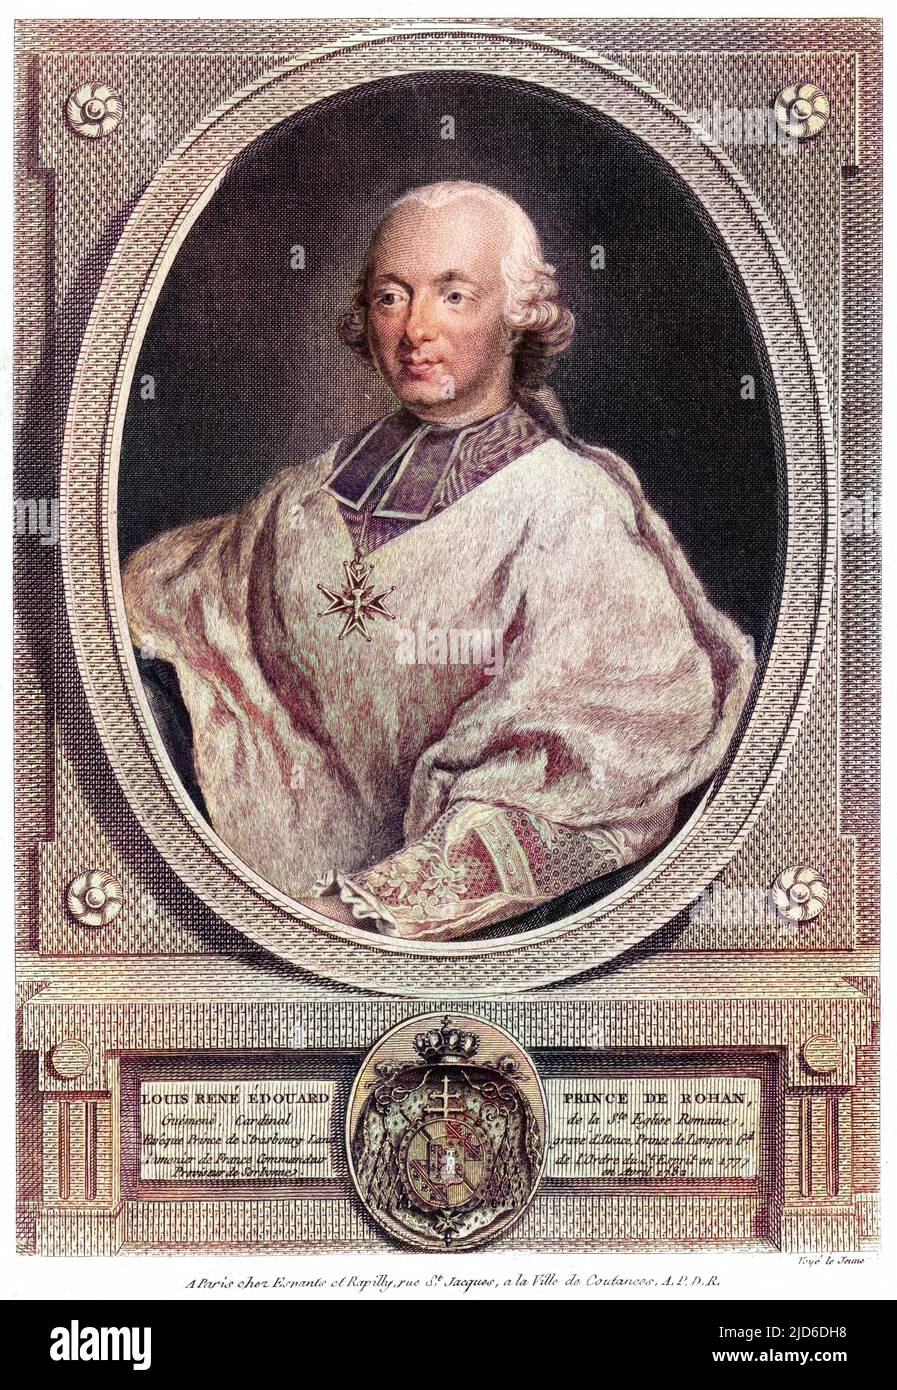 LOUIS RENE EDOUARD, prince and cardinal de ROHAN French churchman, a catholic though his ancestors had generally been protestants. Colourised version of : 10174474       Date: 1734 - 1803 Stock Photo